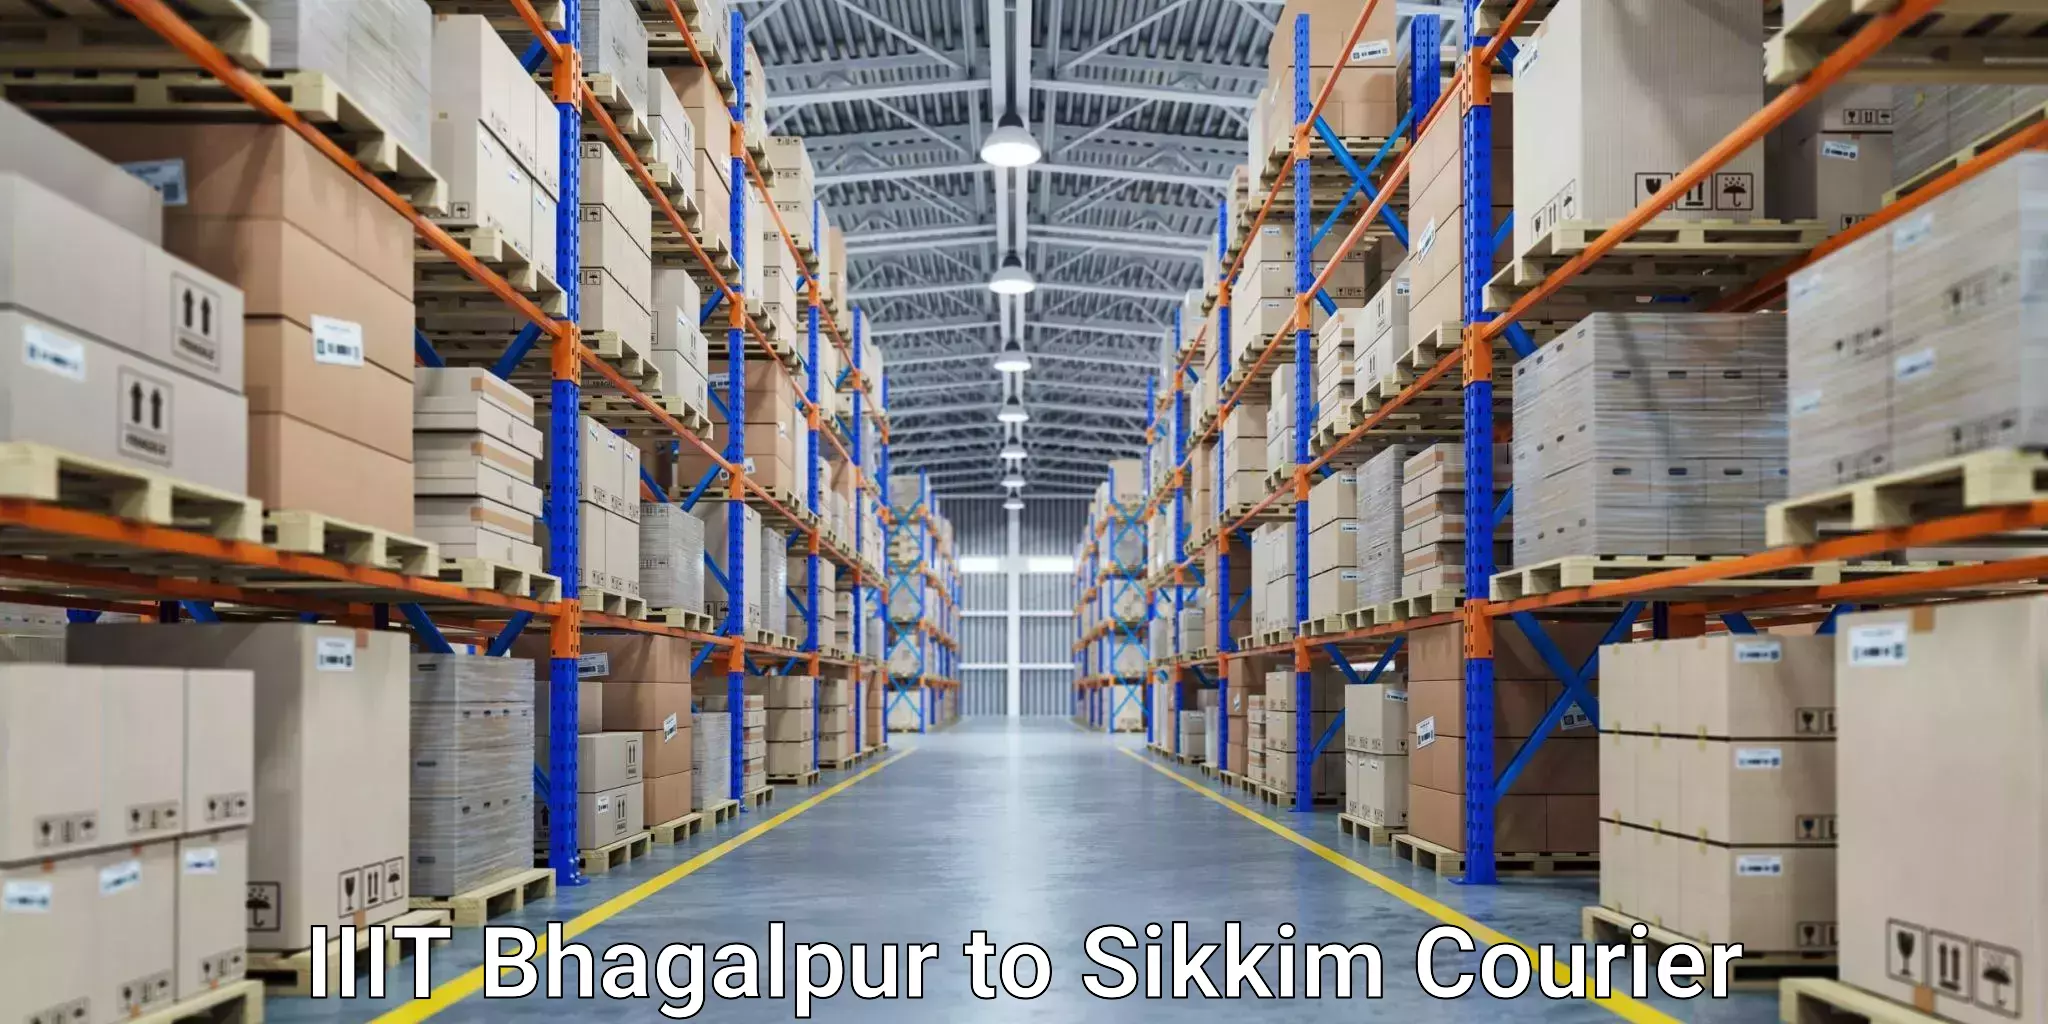 Express delivery solutions IIIT Bhagalpur to Sikkim